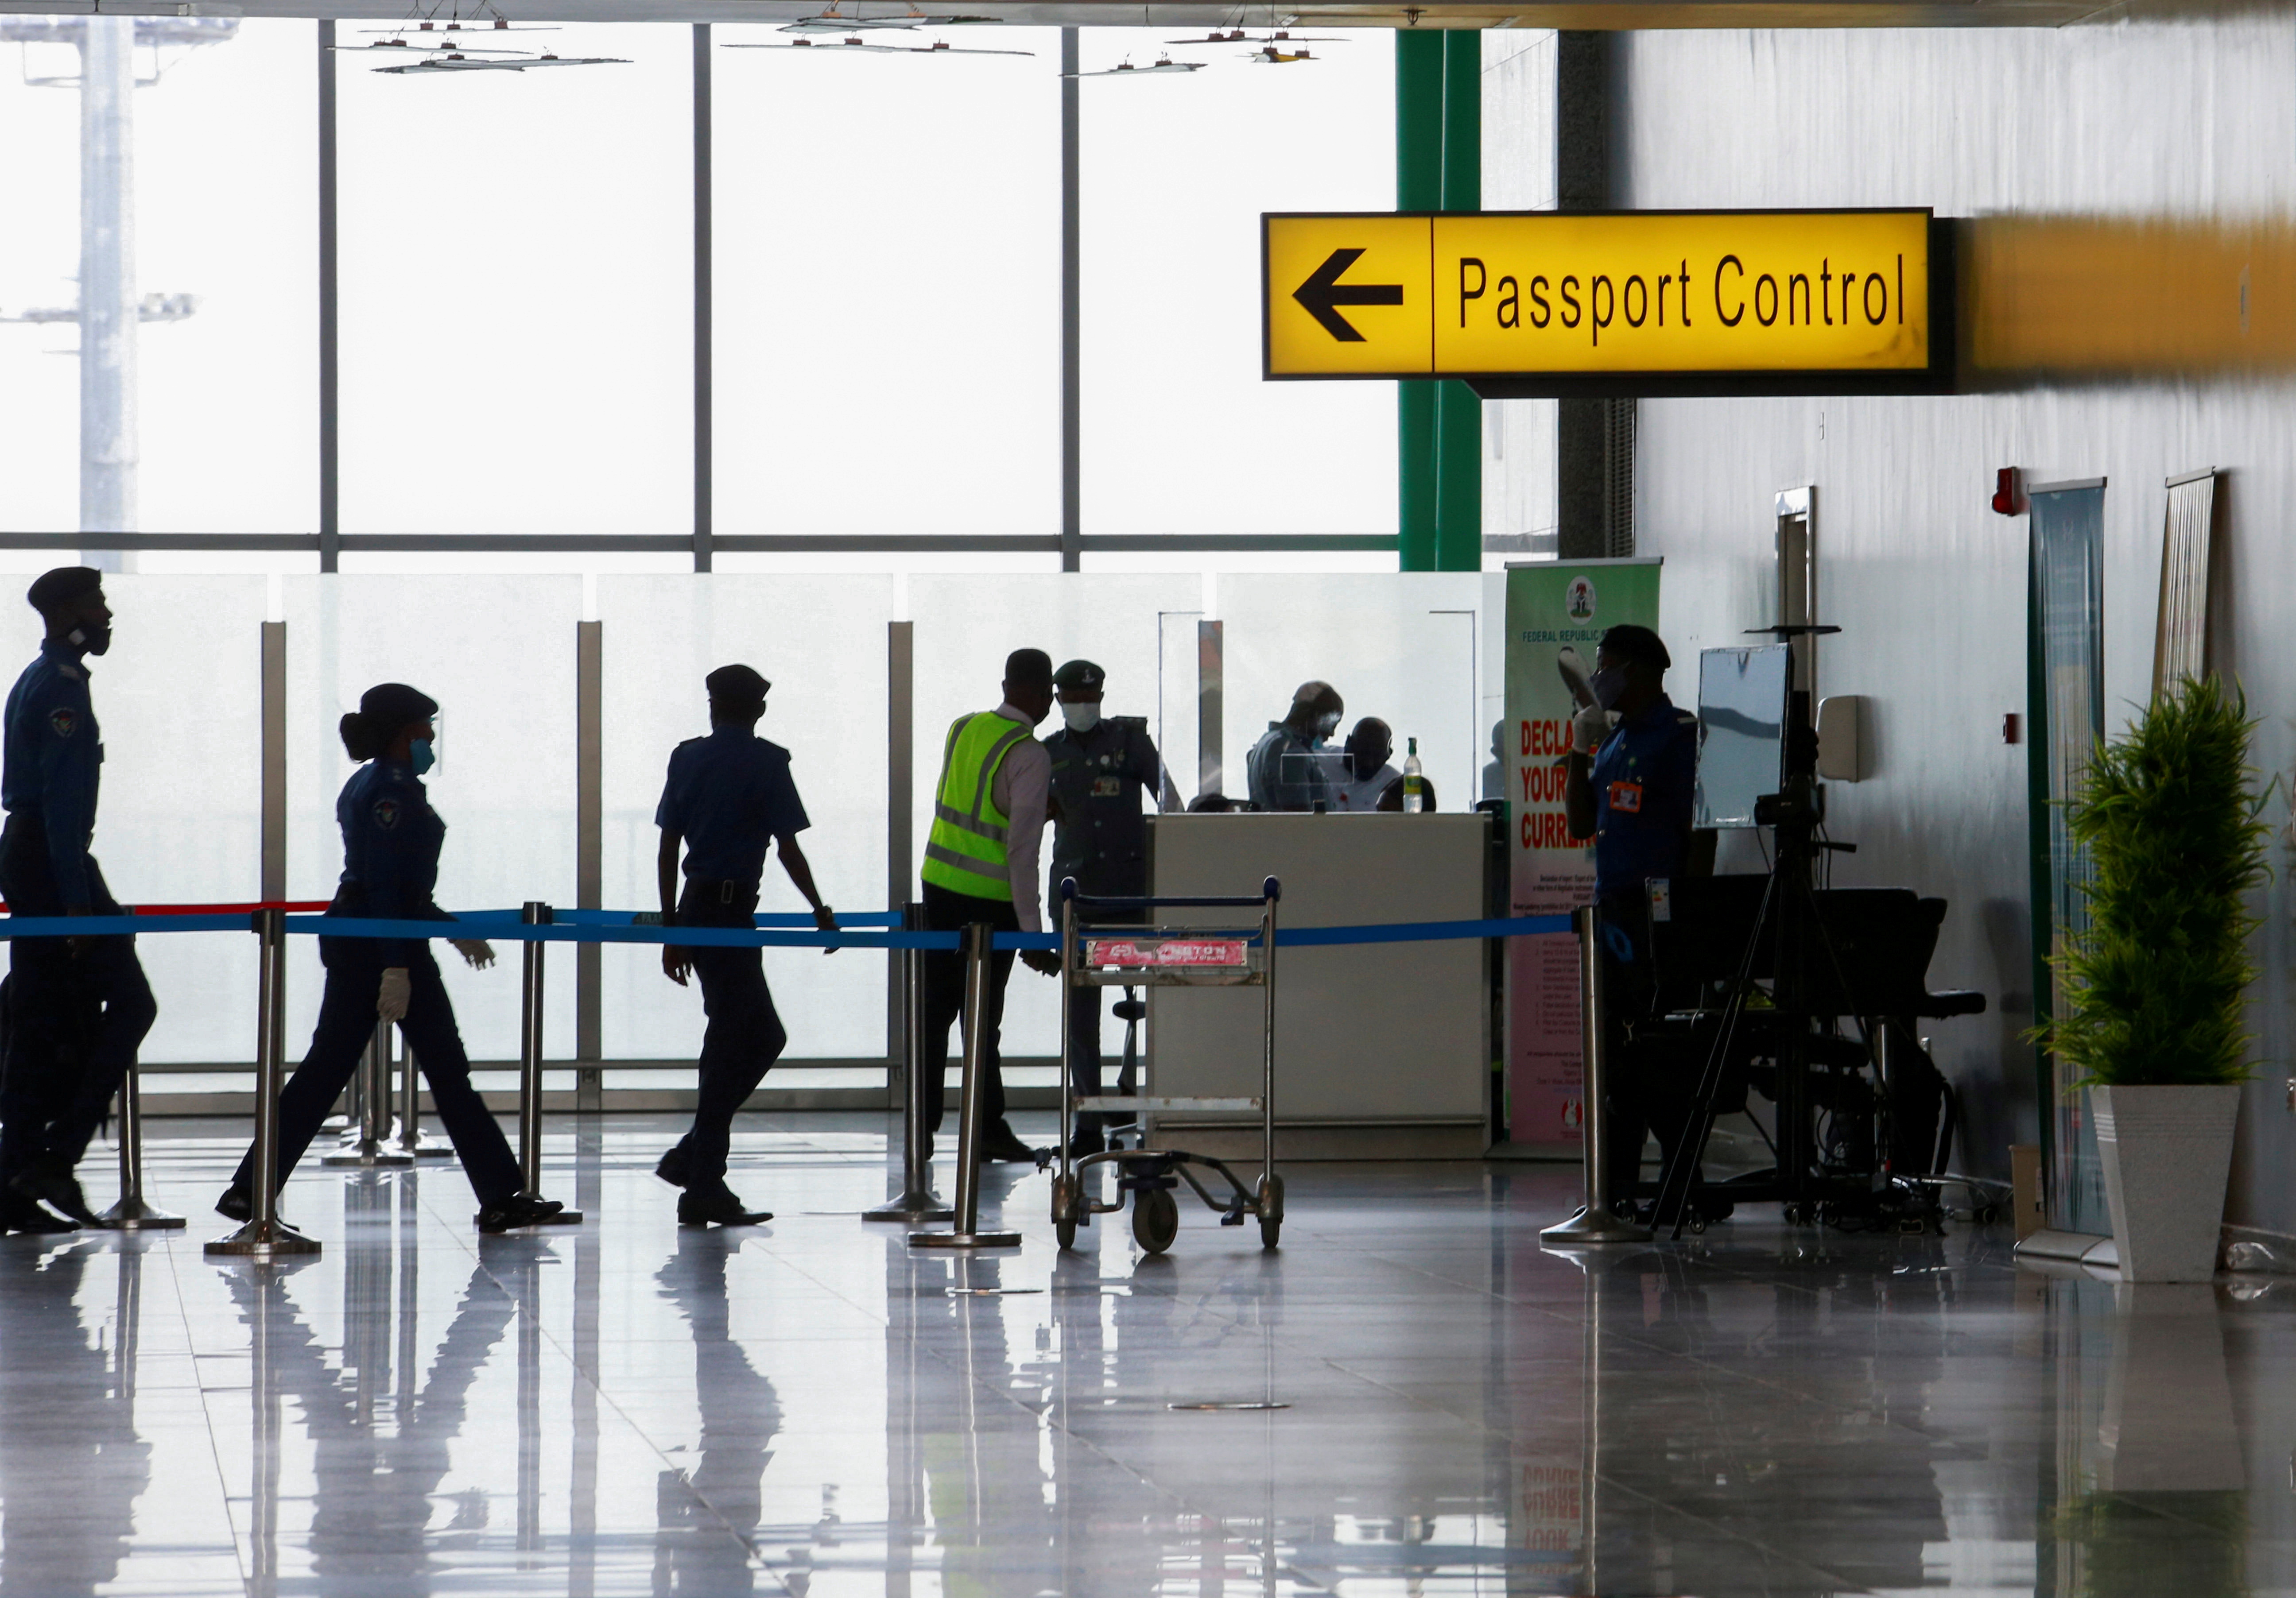 Security officers are seen at the passport control point at the Nnamdi Azikiwe international airport in Abuja